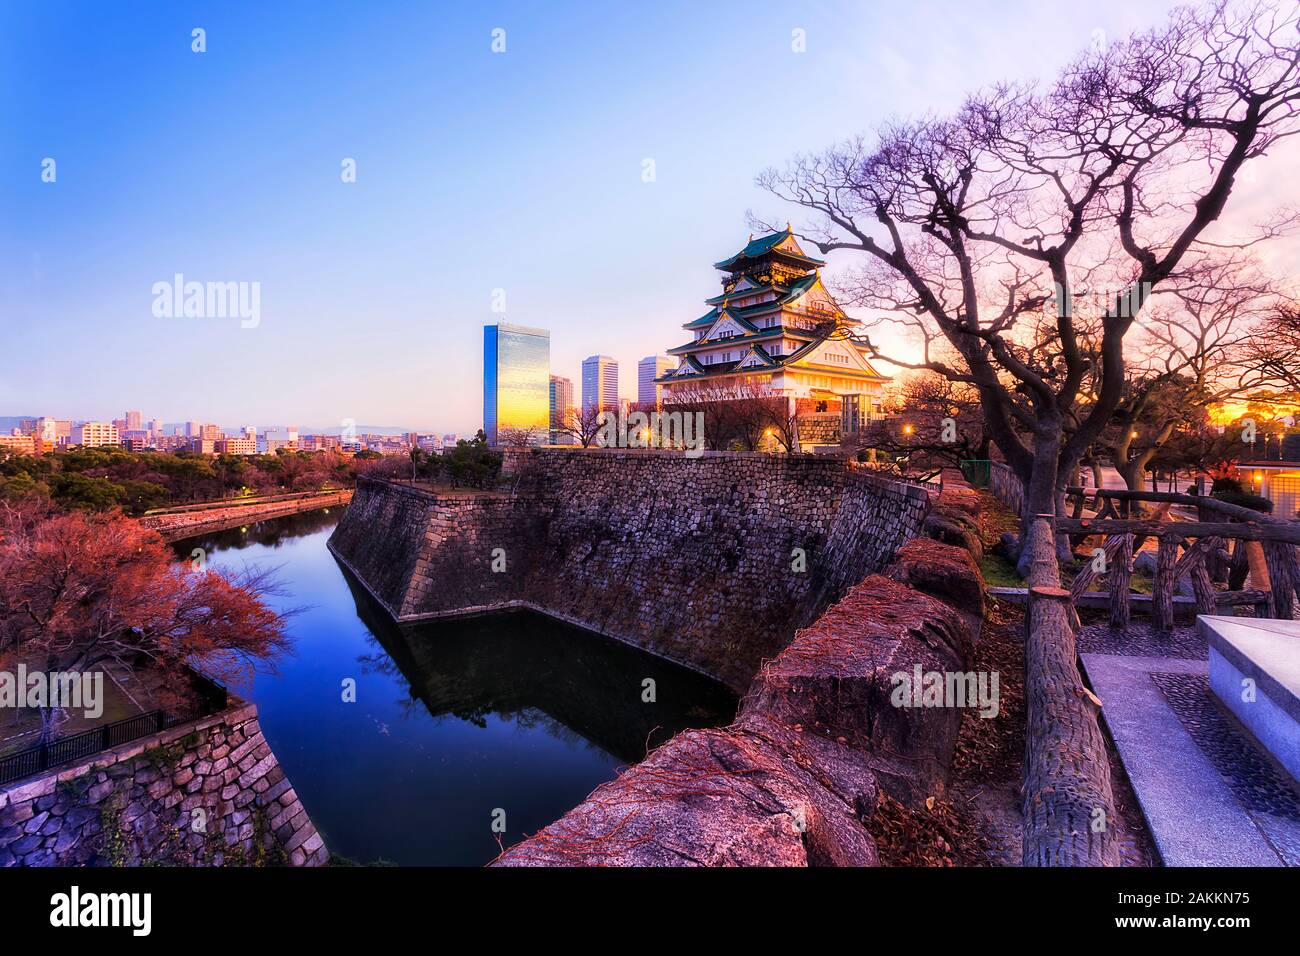 The main keep of Osaka castle from shogun times rising over stone walls and water filled moats at sunrise against clear sky and distant modern busines Stock Photo